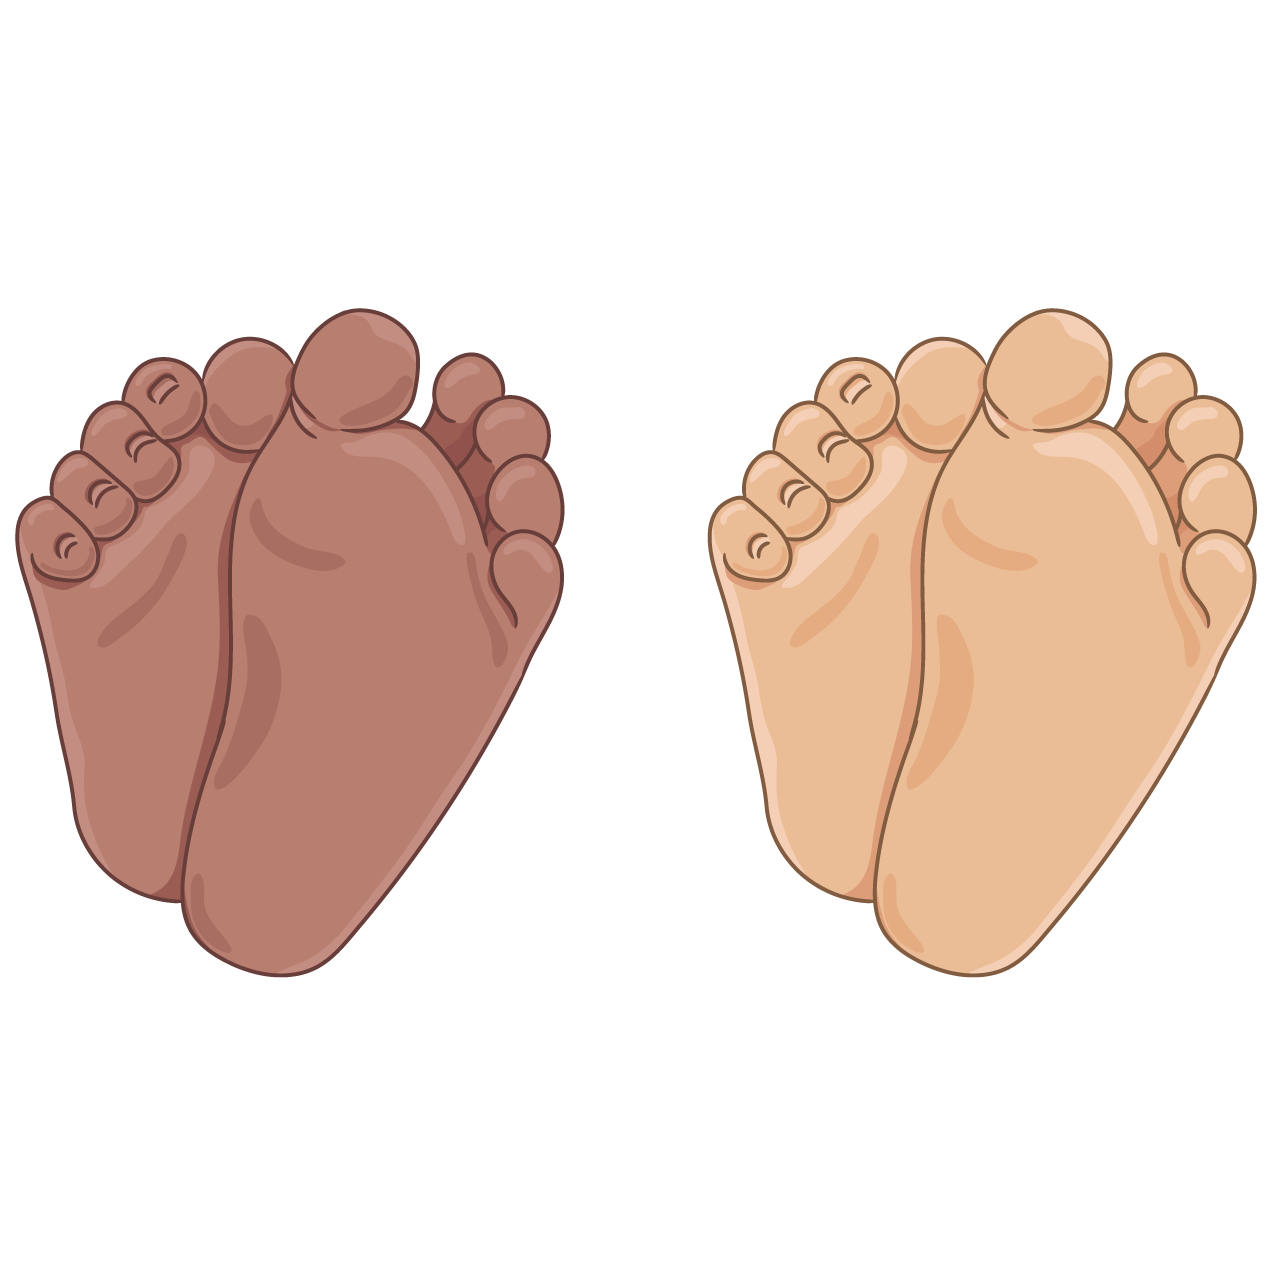 Newborn baby foot soles barefoot bottom view tiny plump feet with cute heels toes caucasian african american skin color cartoon